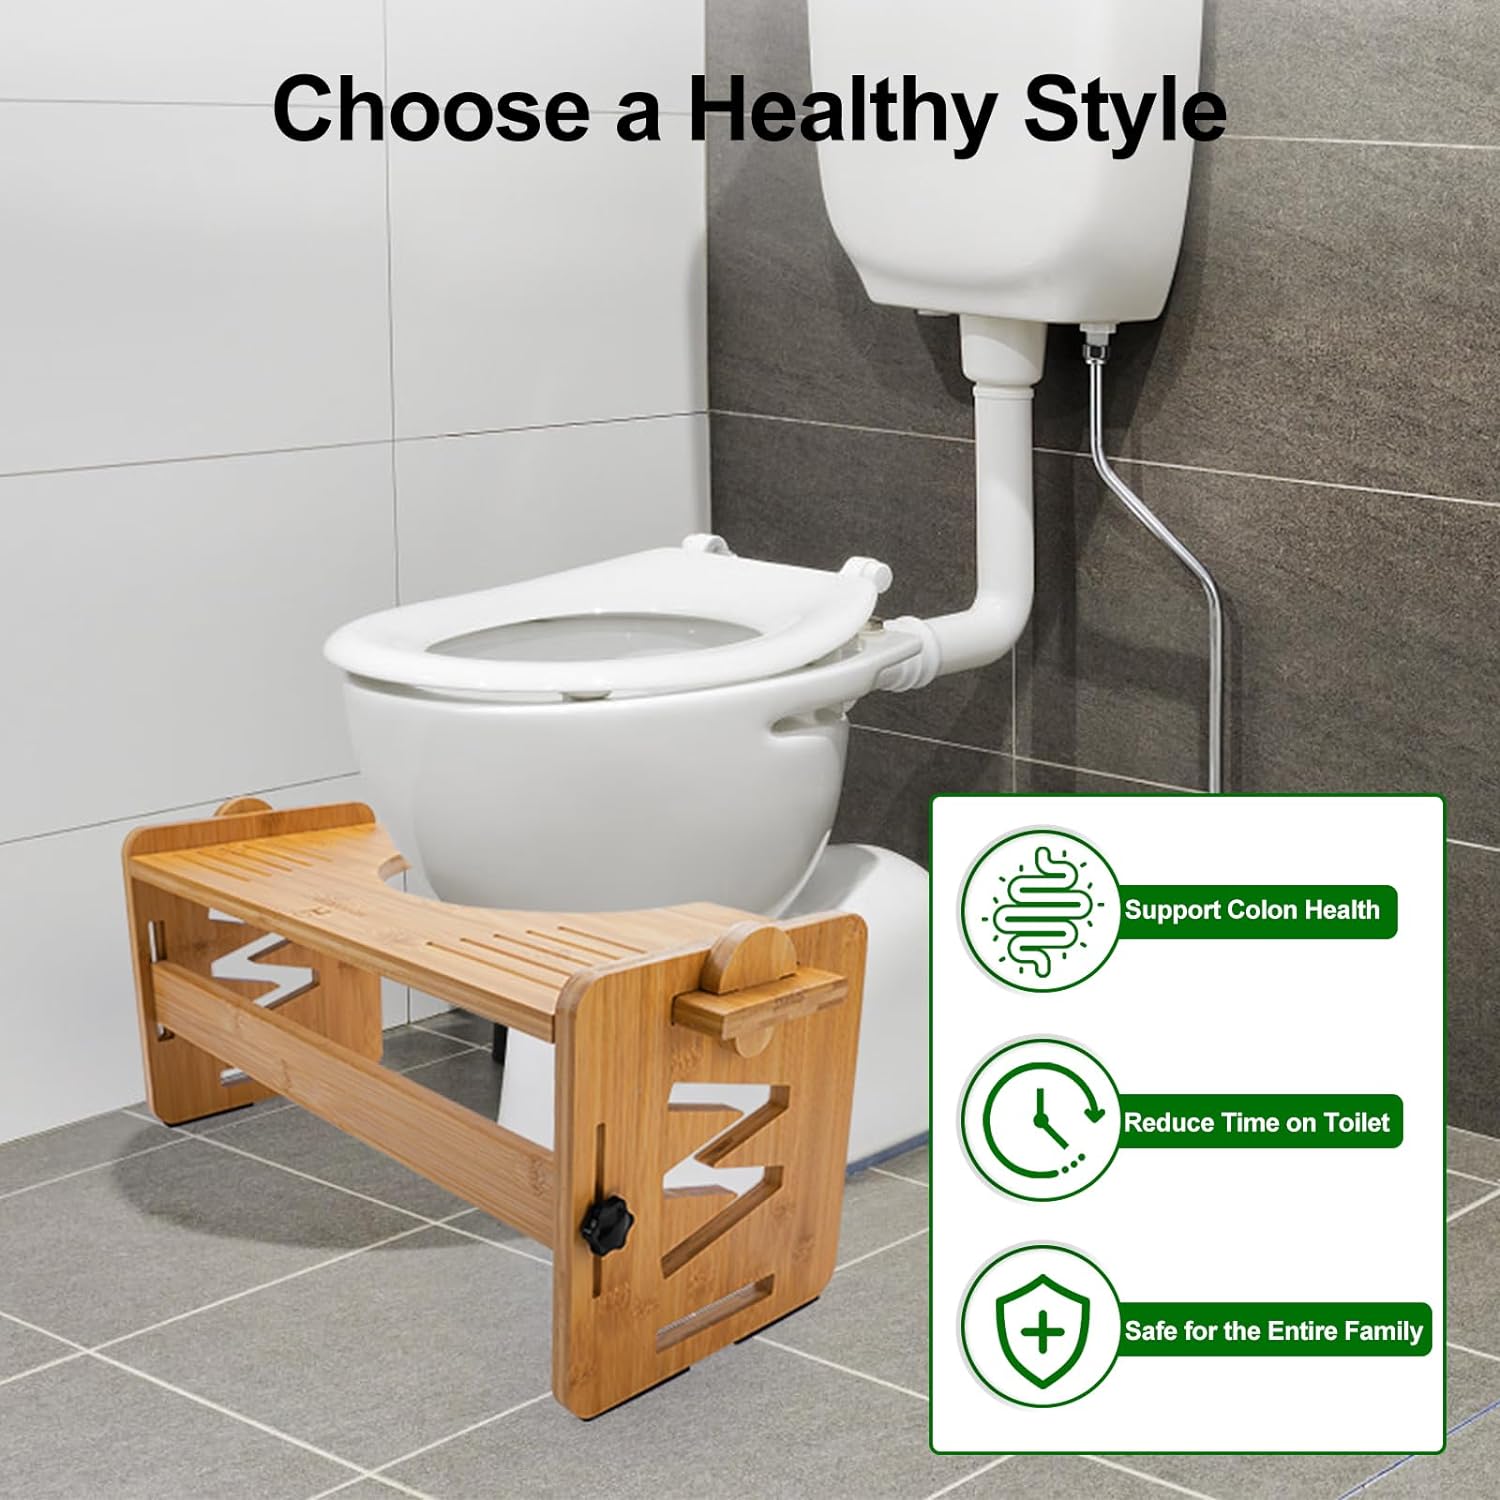 Bamboo Toilet Stool- Hotodeal 9" Poop Stool Adjustable Heights Squat Stool Potty